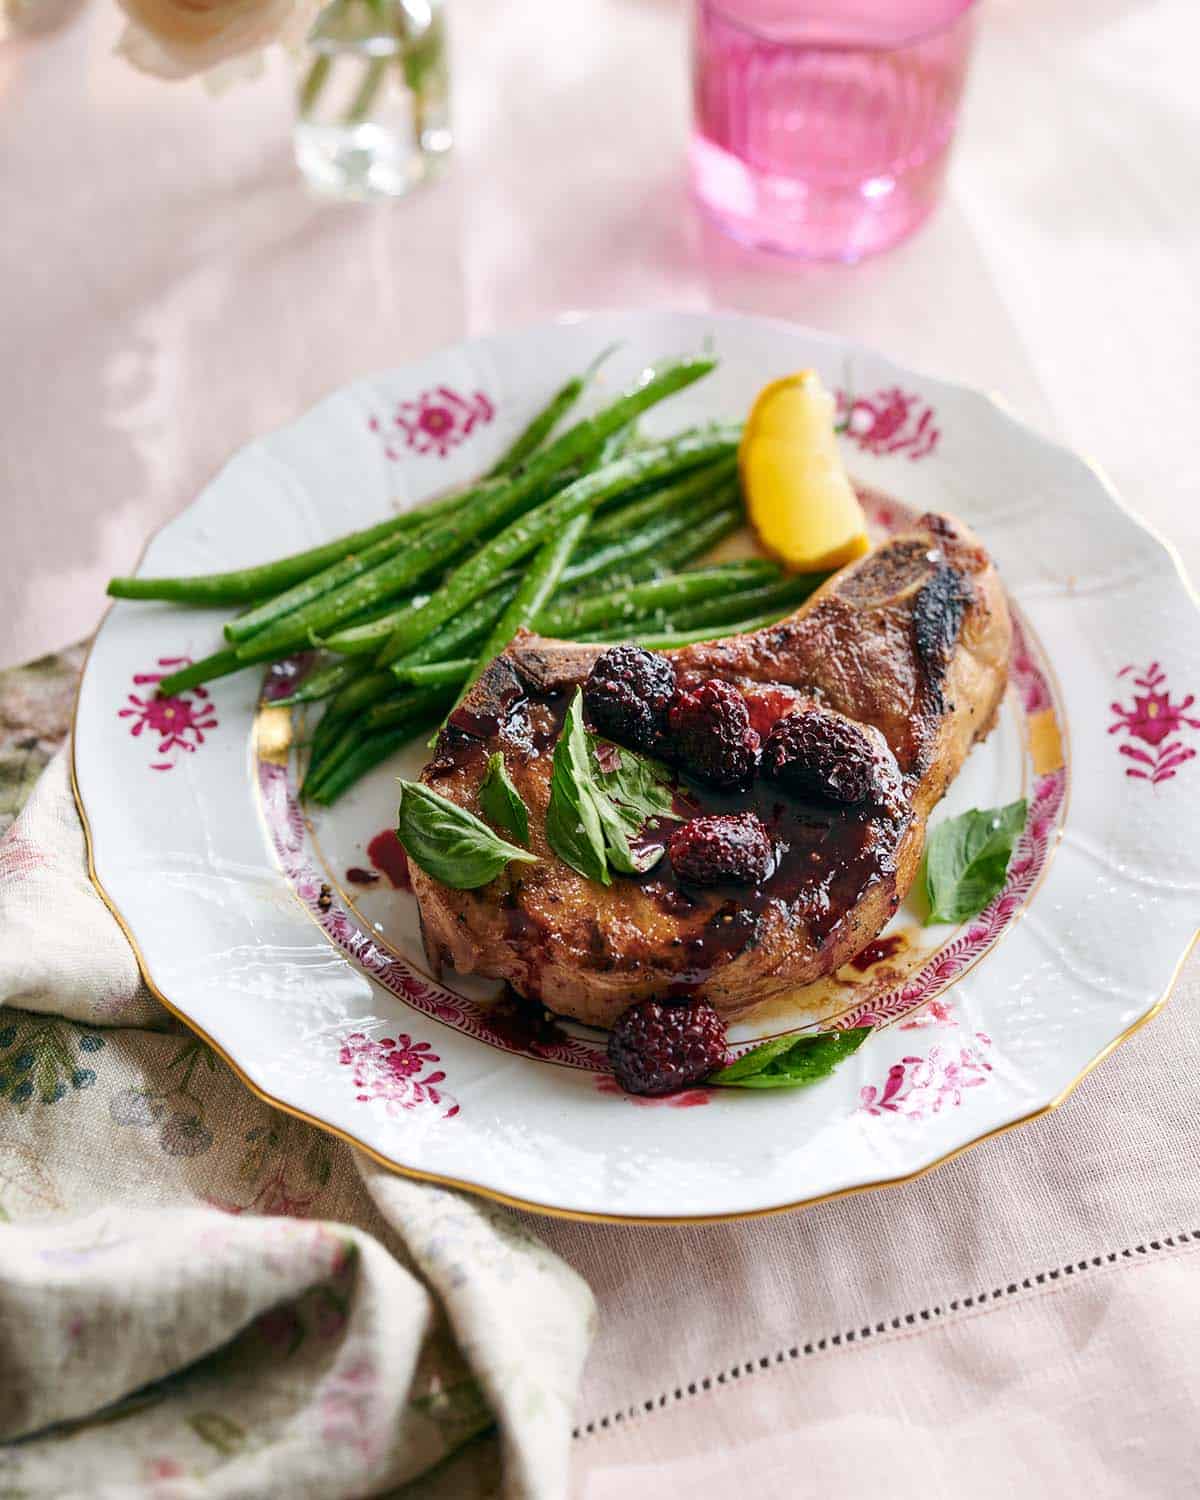 A porkchop on a plate with a blackberry balsamic reduction.